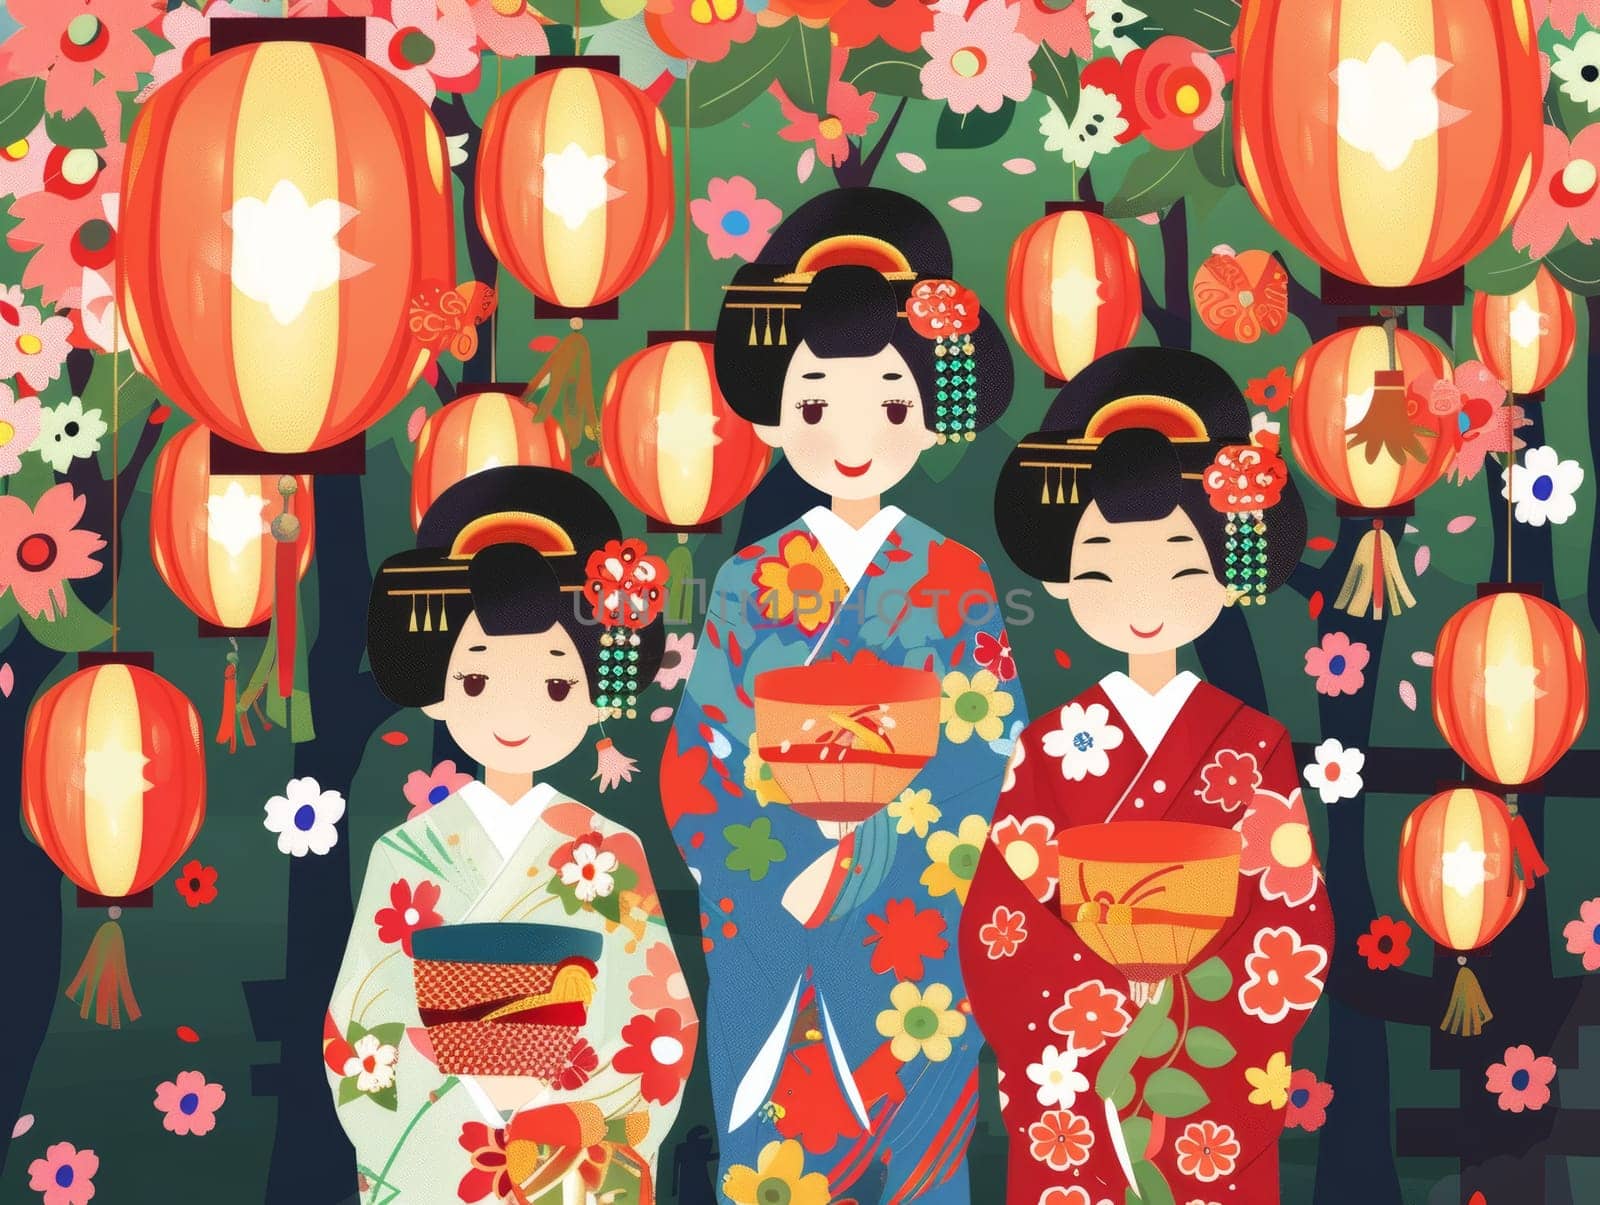 Colorful geisha figures surrounded by blooming flowers, lanterns, and traditional Japanese elements create a lively, festive scene bursting with cultural heritage and charm. by sfinks